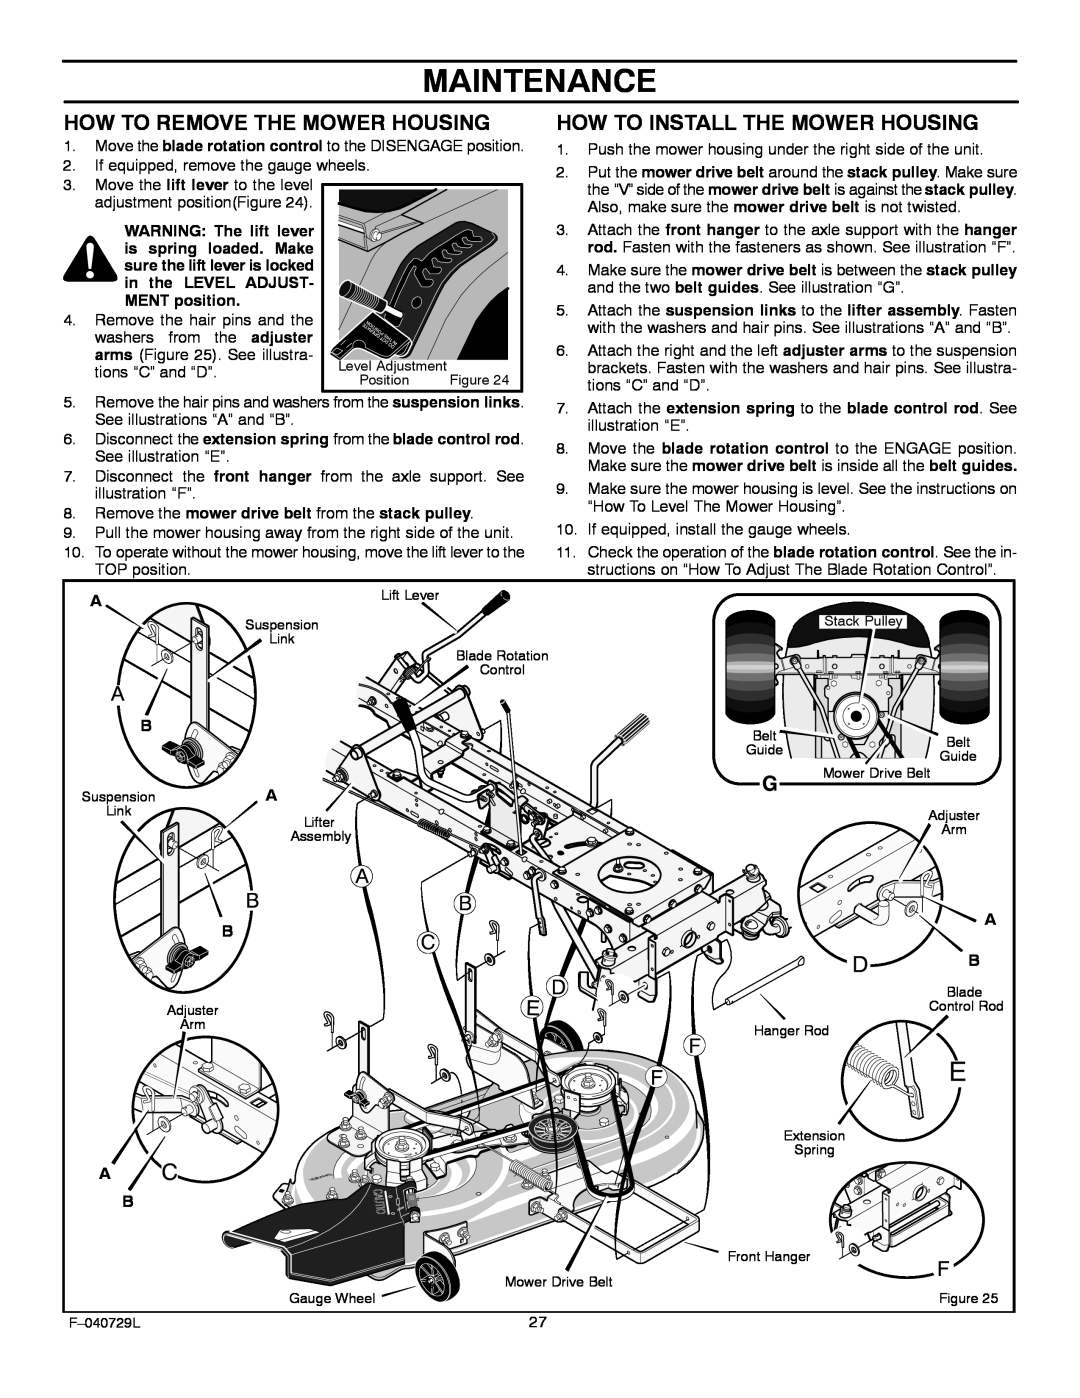 Murray 425620x92A manual Maintenance, How To Remove The Mower Housing, How To Install The Mower Housing 